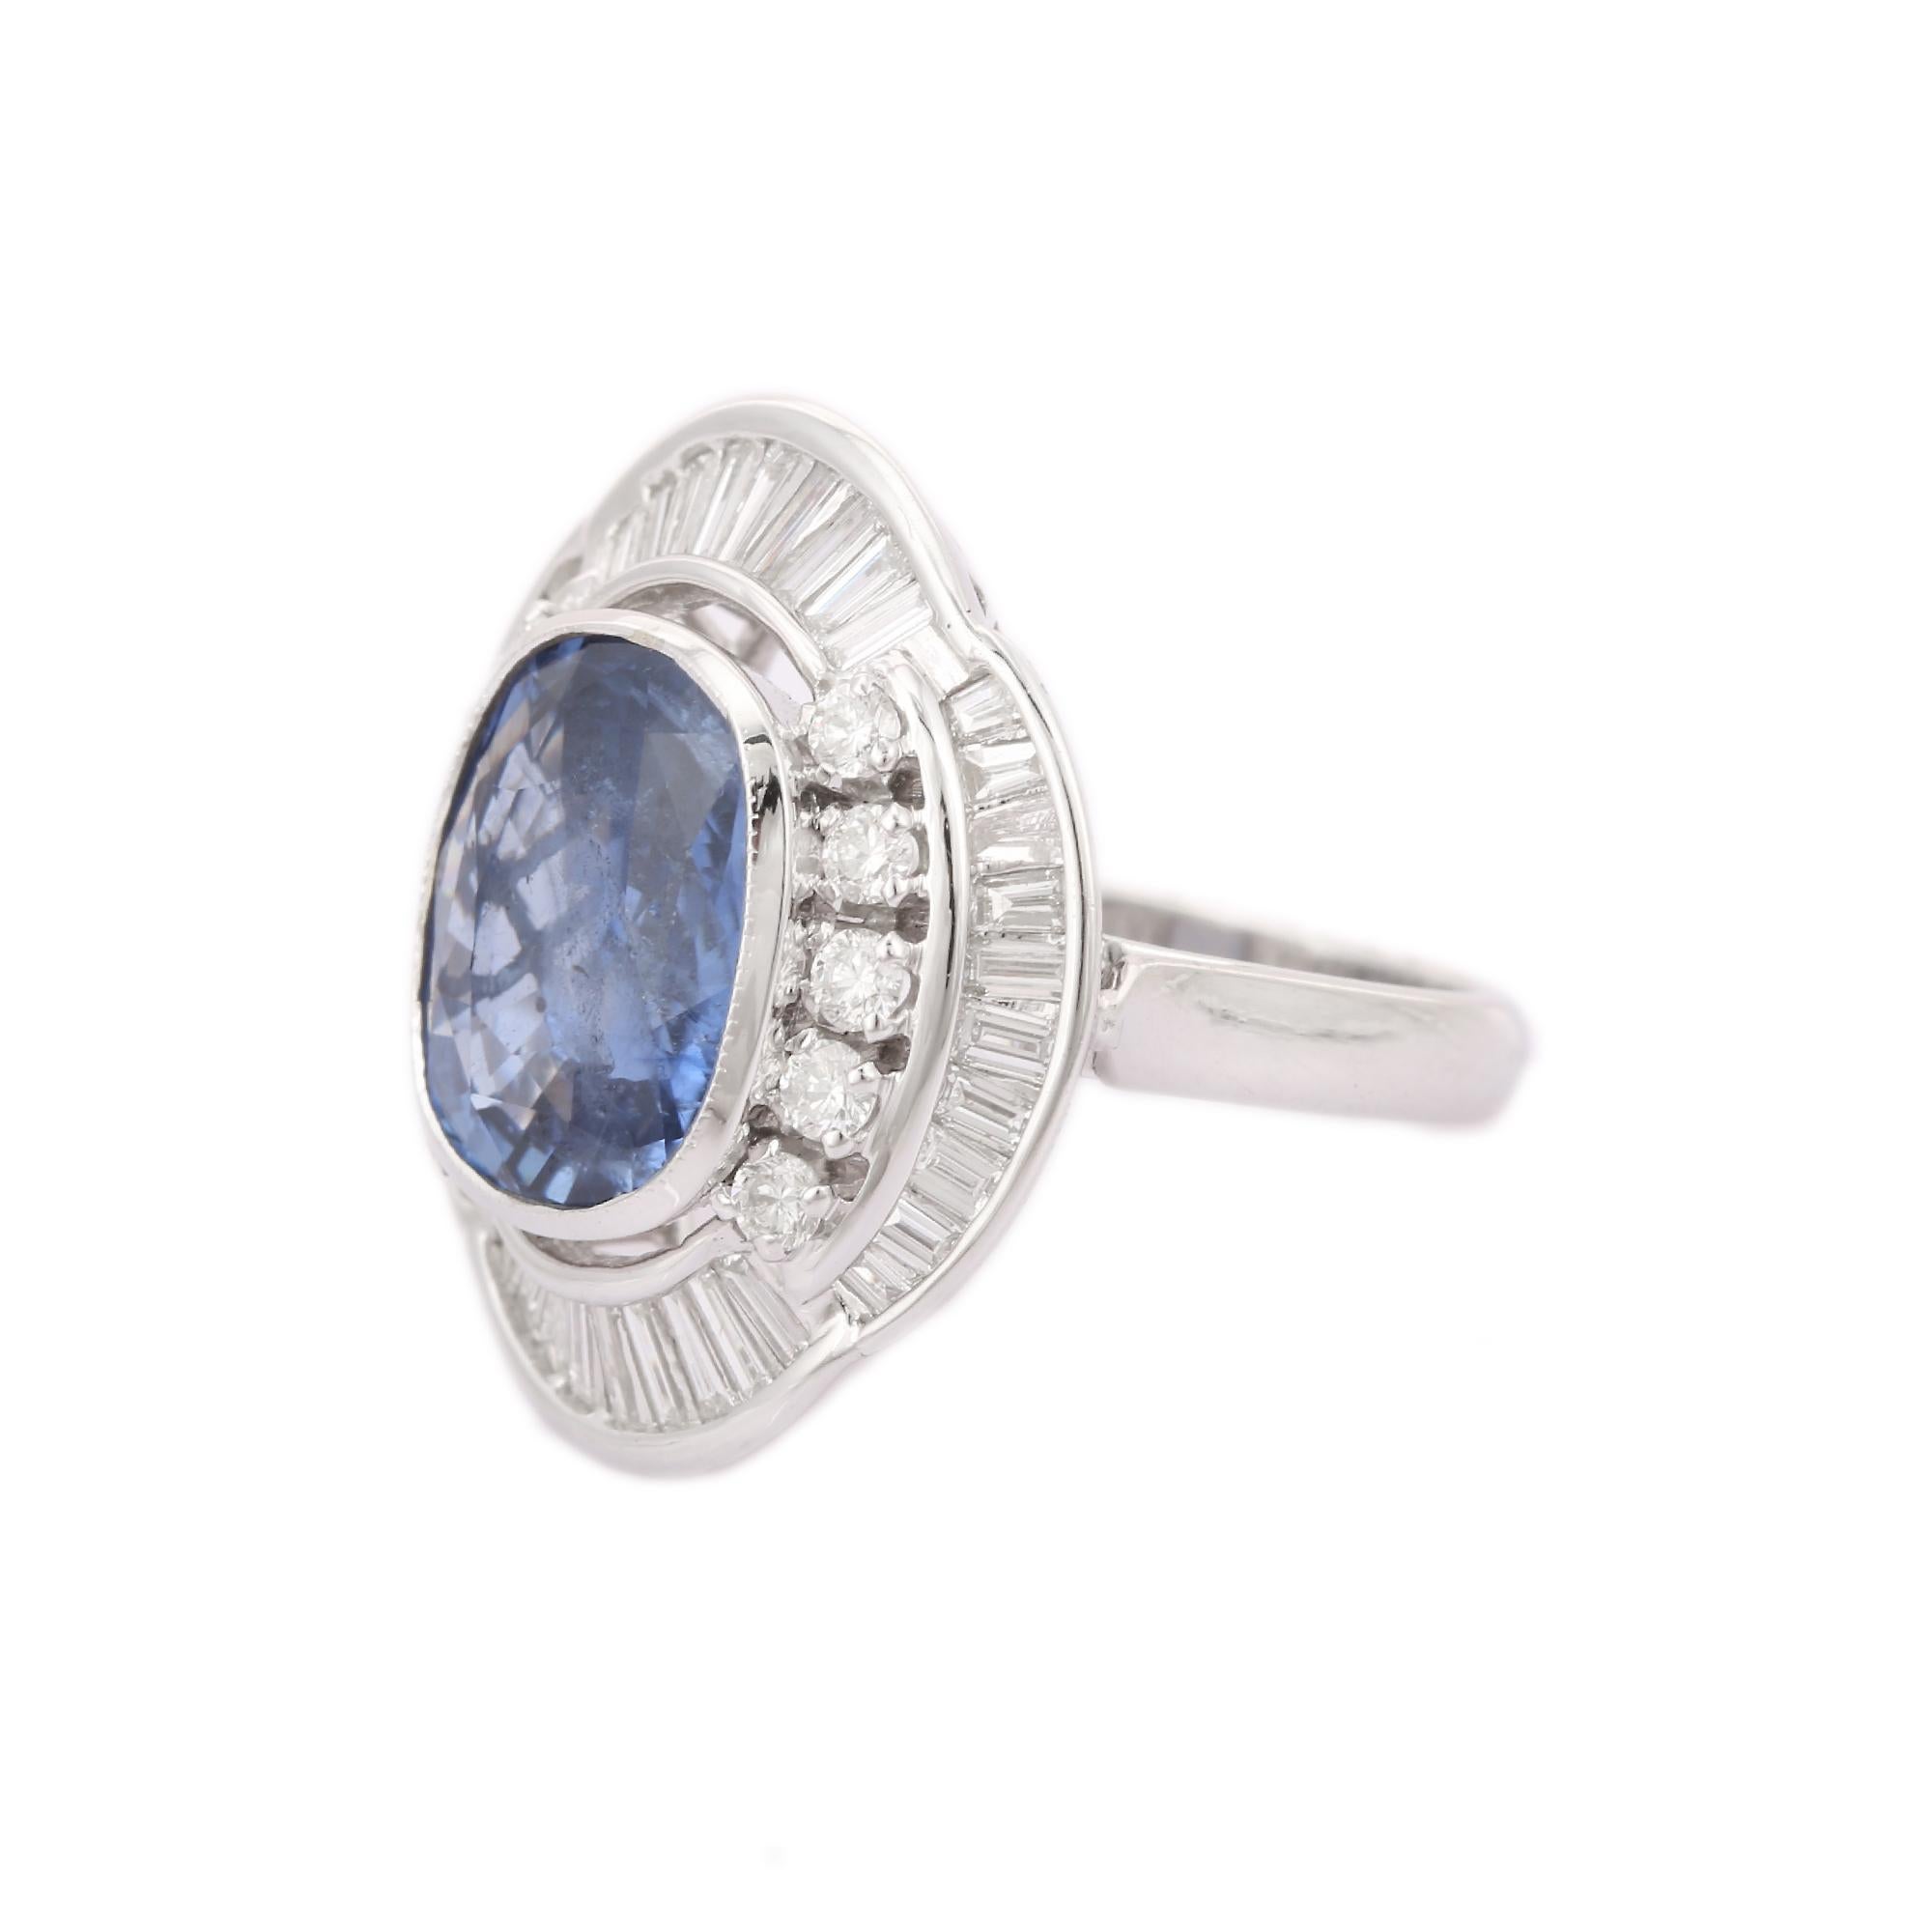 For Sale:  18kt Solid White Gold 6.43 ct Cushion Blue Sapphire Diamond Cocktail Ring 3